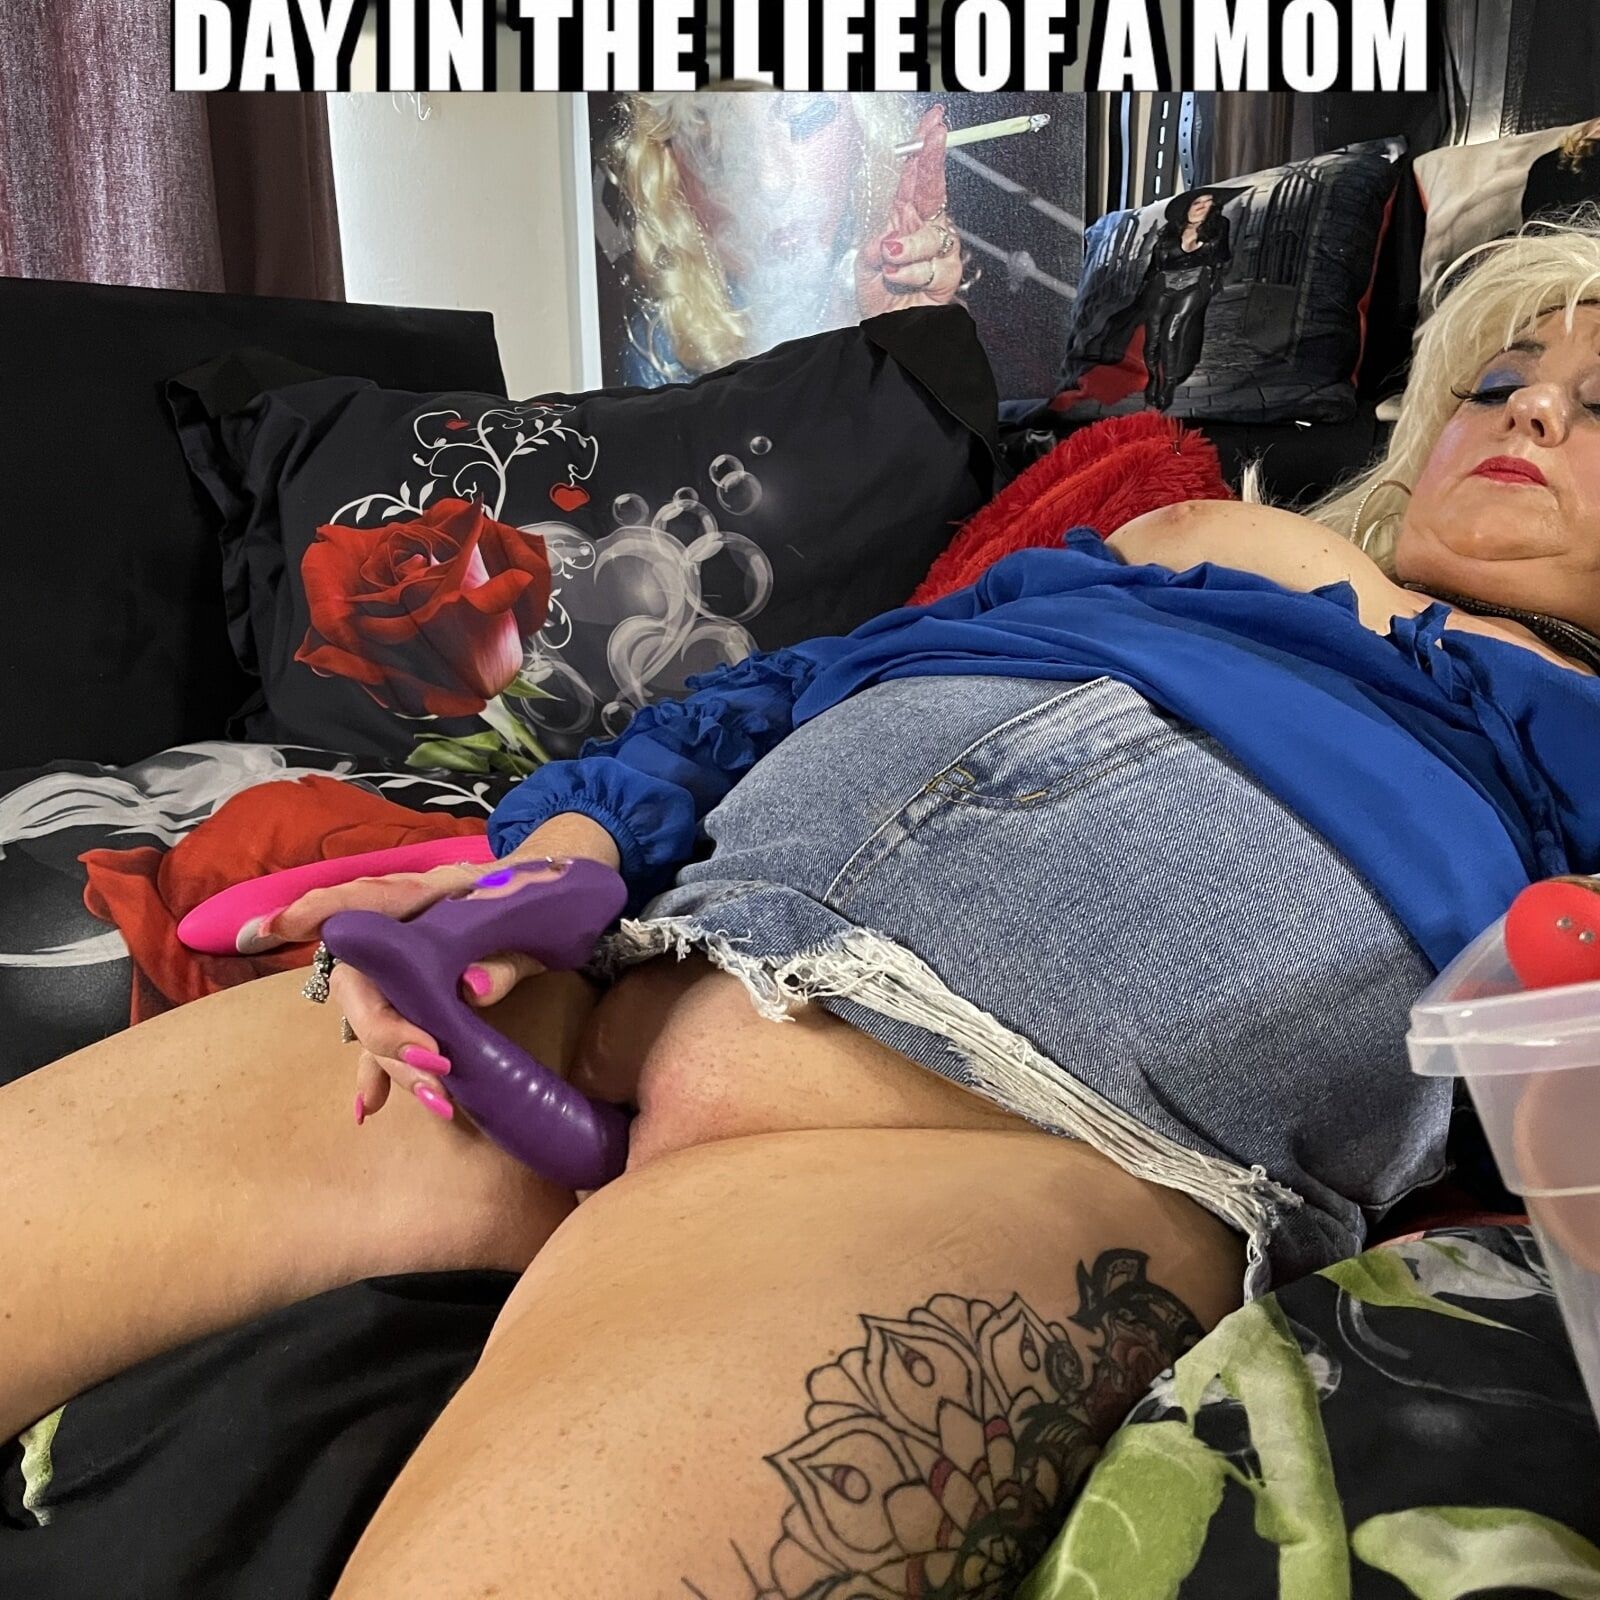 SHIRLEY THE LIFE OF A MOM #40